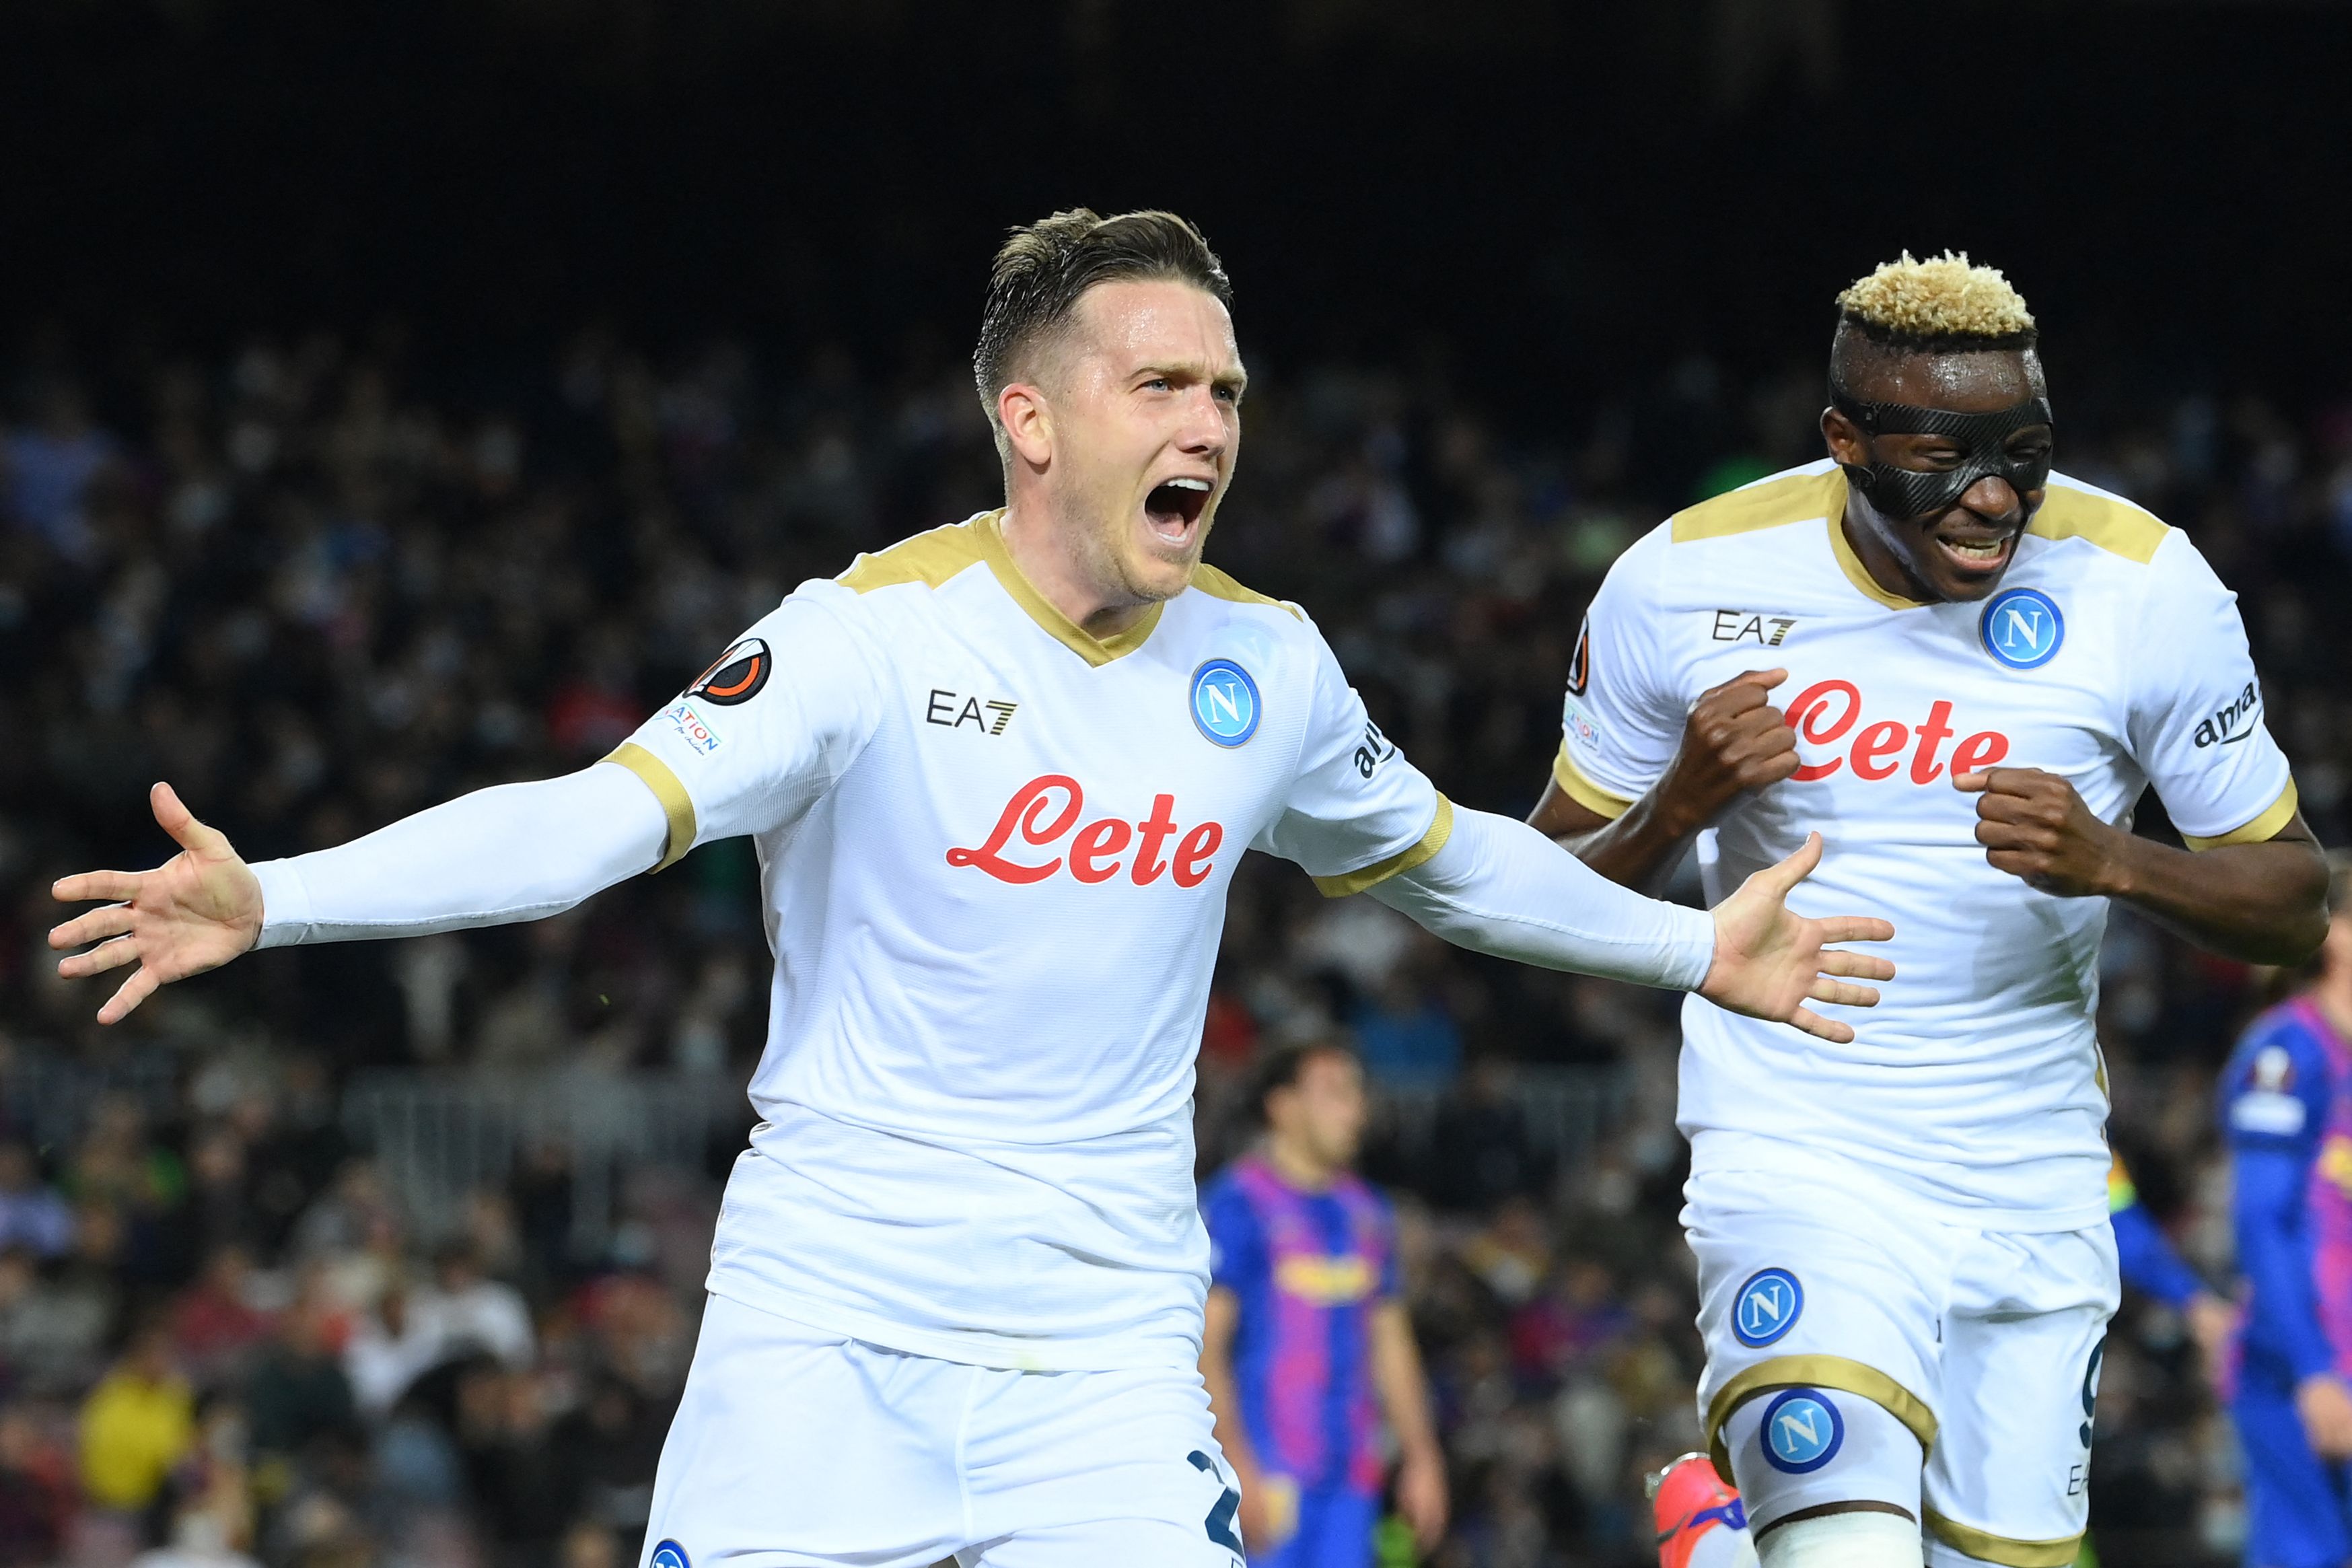 Barcelona 1-1 Napoli highlights: Ferran Torres scores in the Europa League from the penalty spot to nullify Napoli's early lead in the first leg of the Round of 16